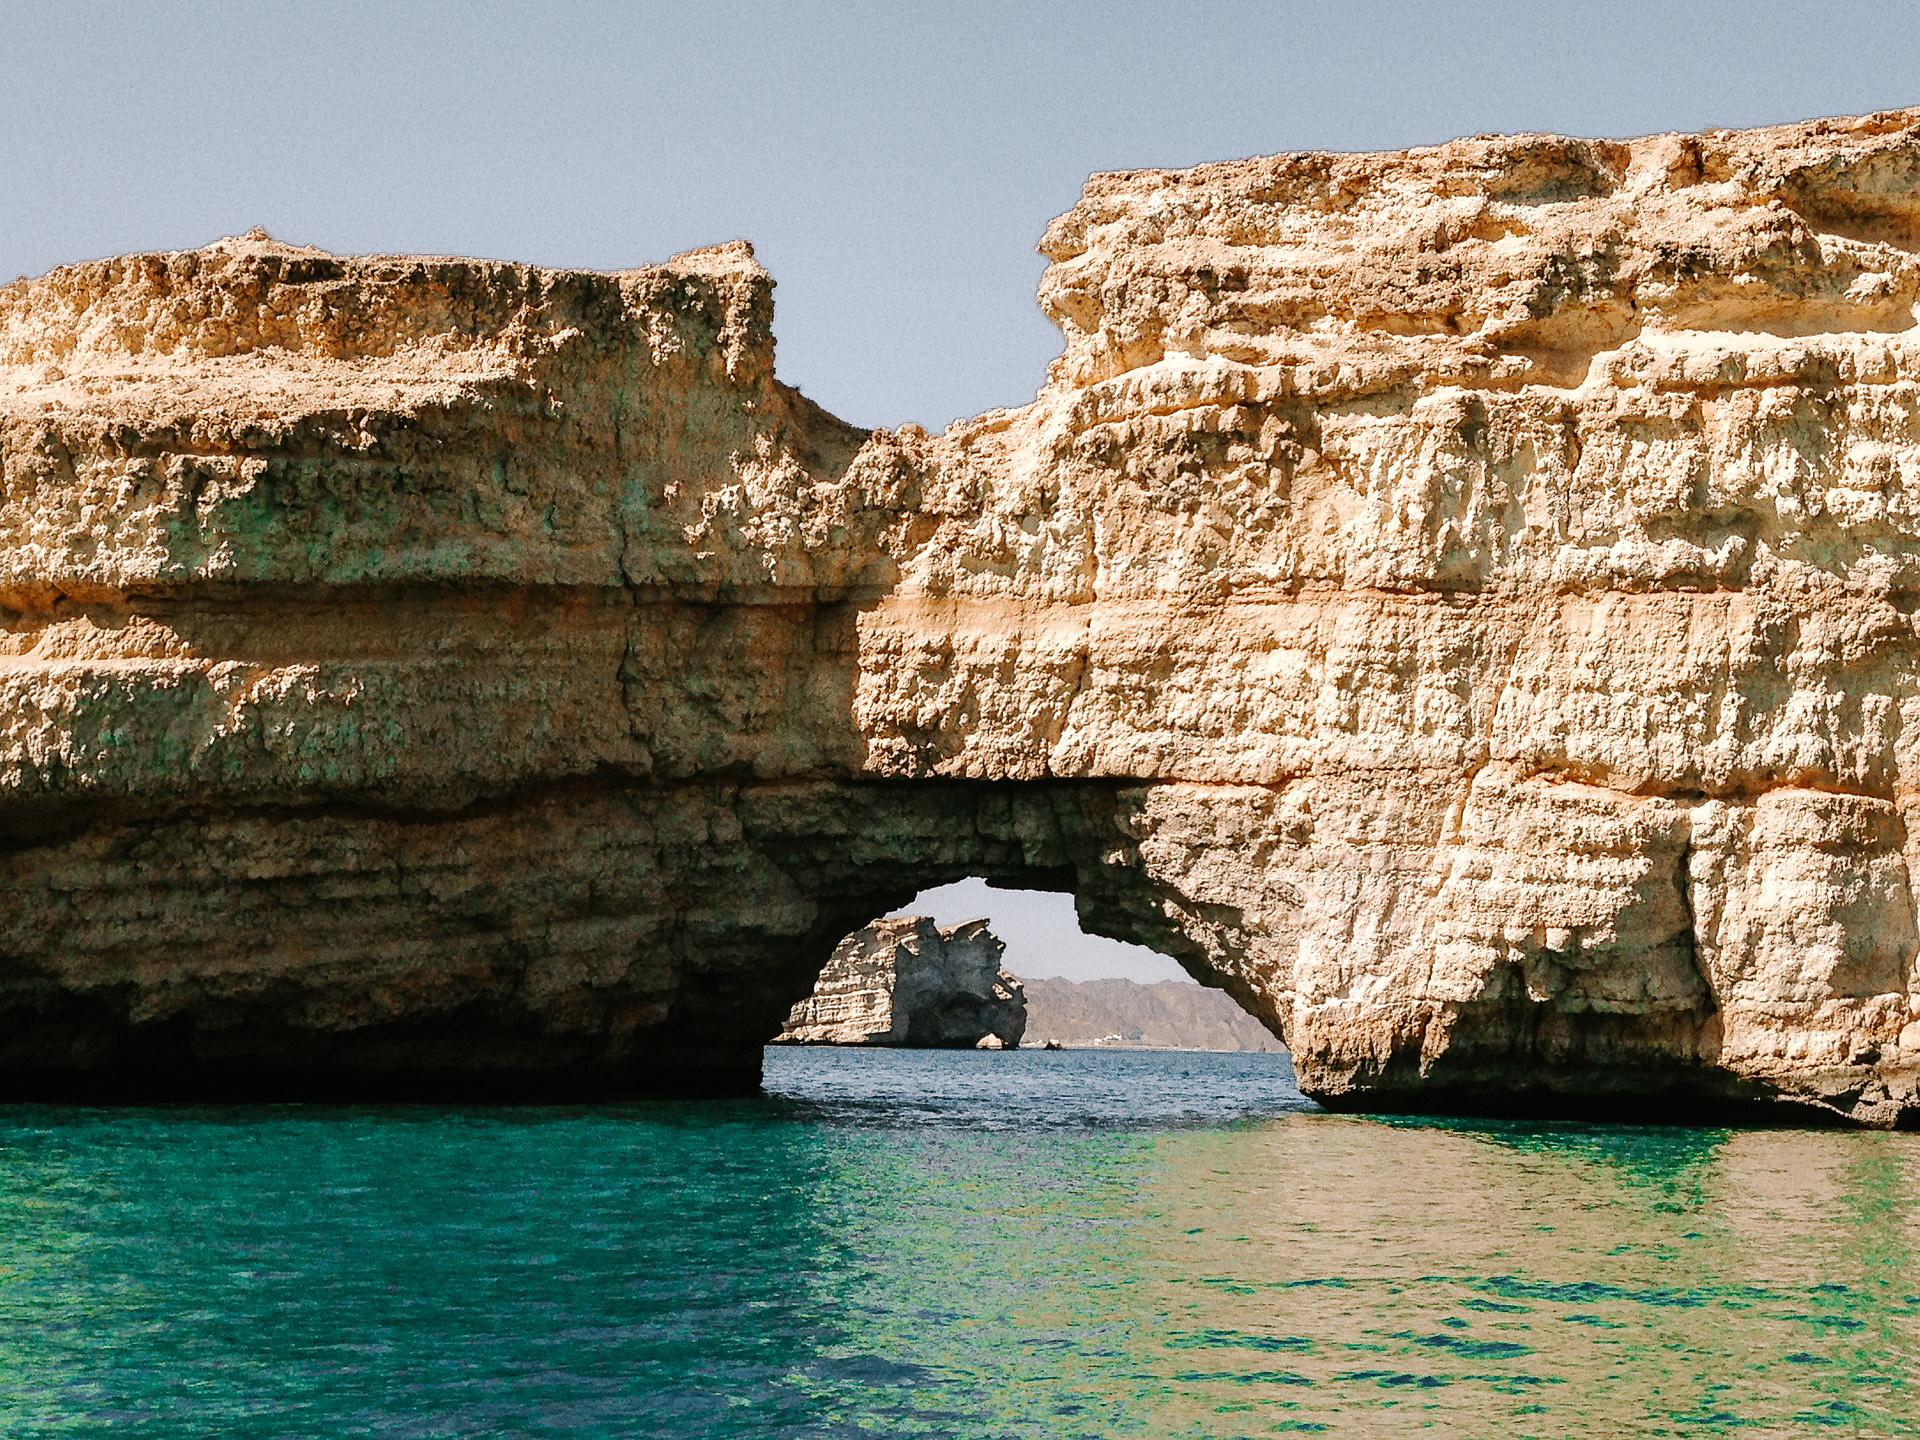 A rocky cliff with a hole underneath it in Oman